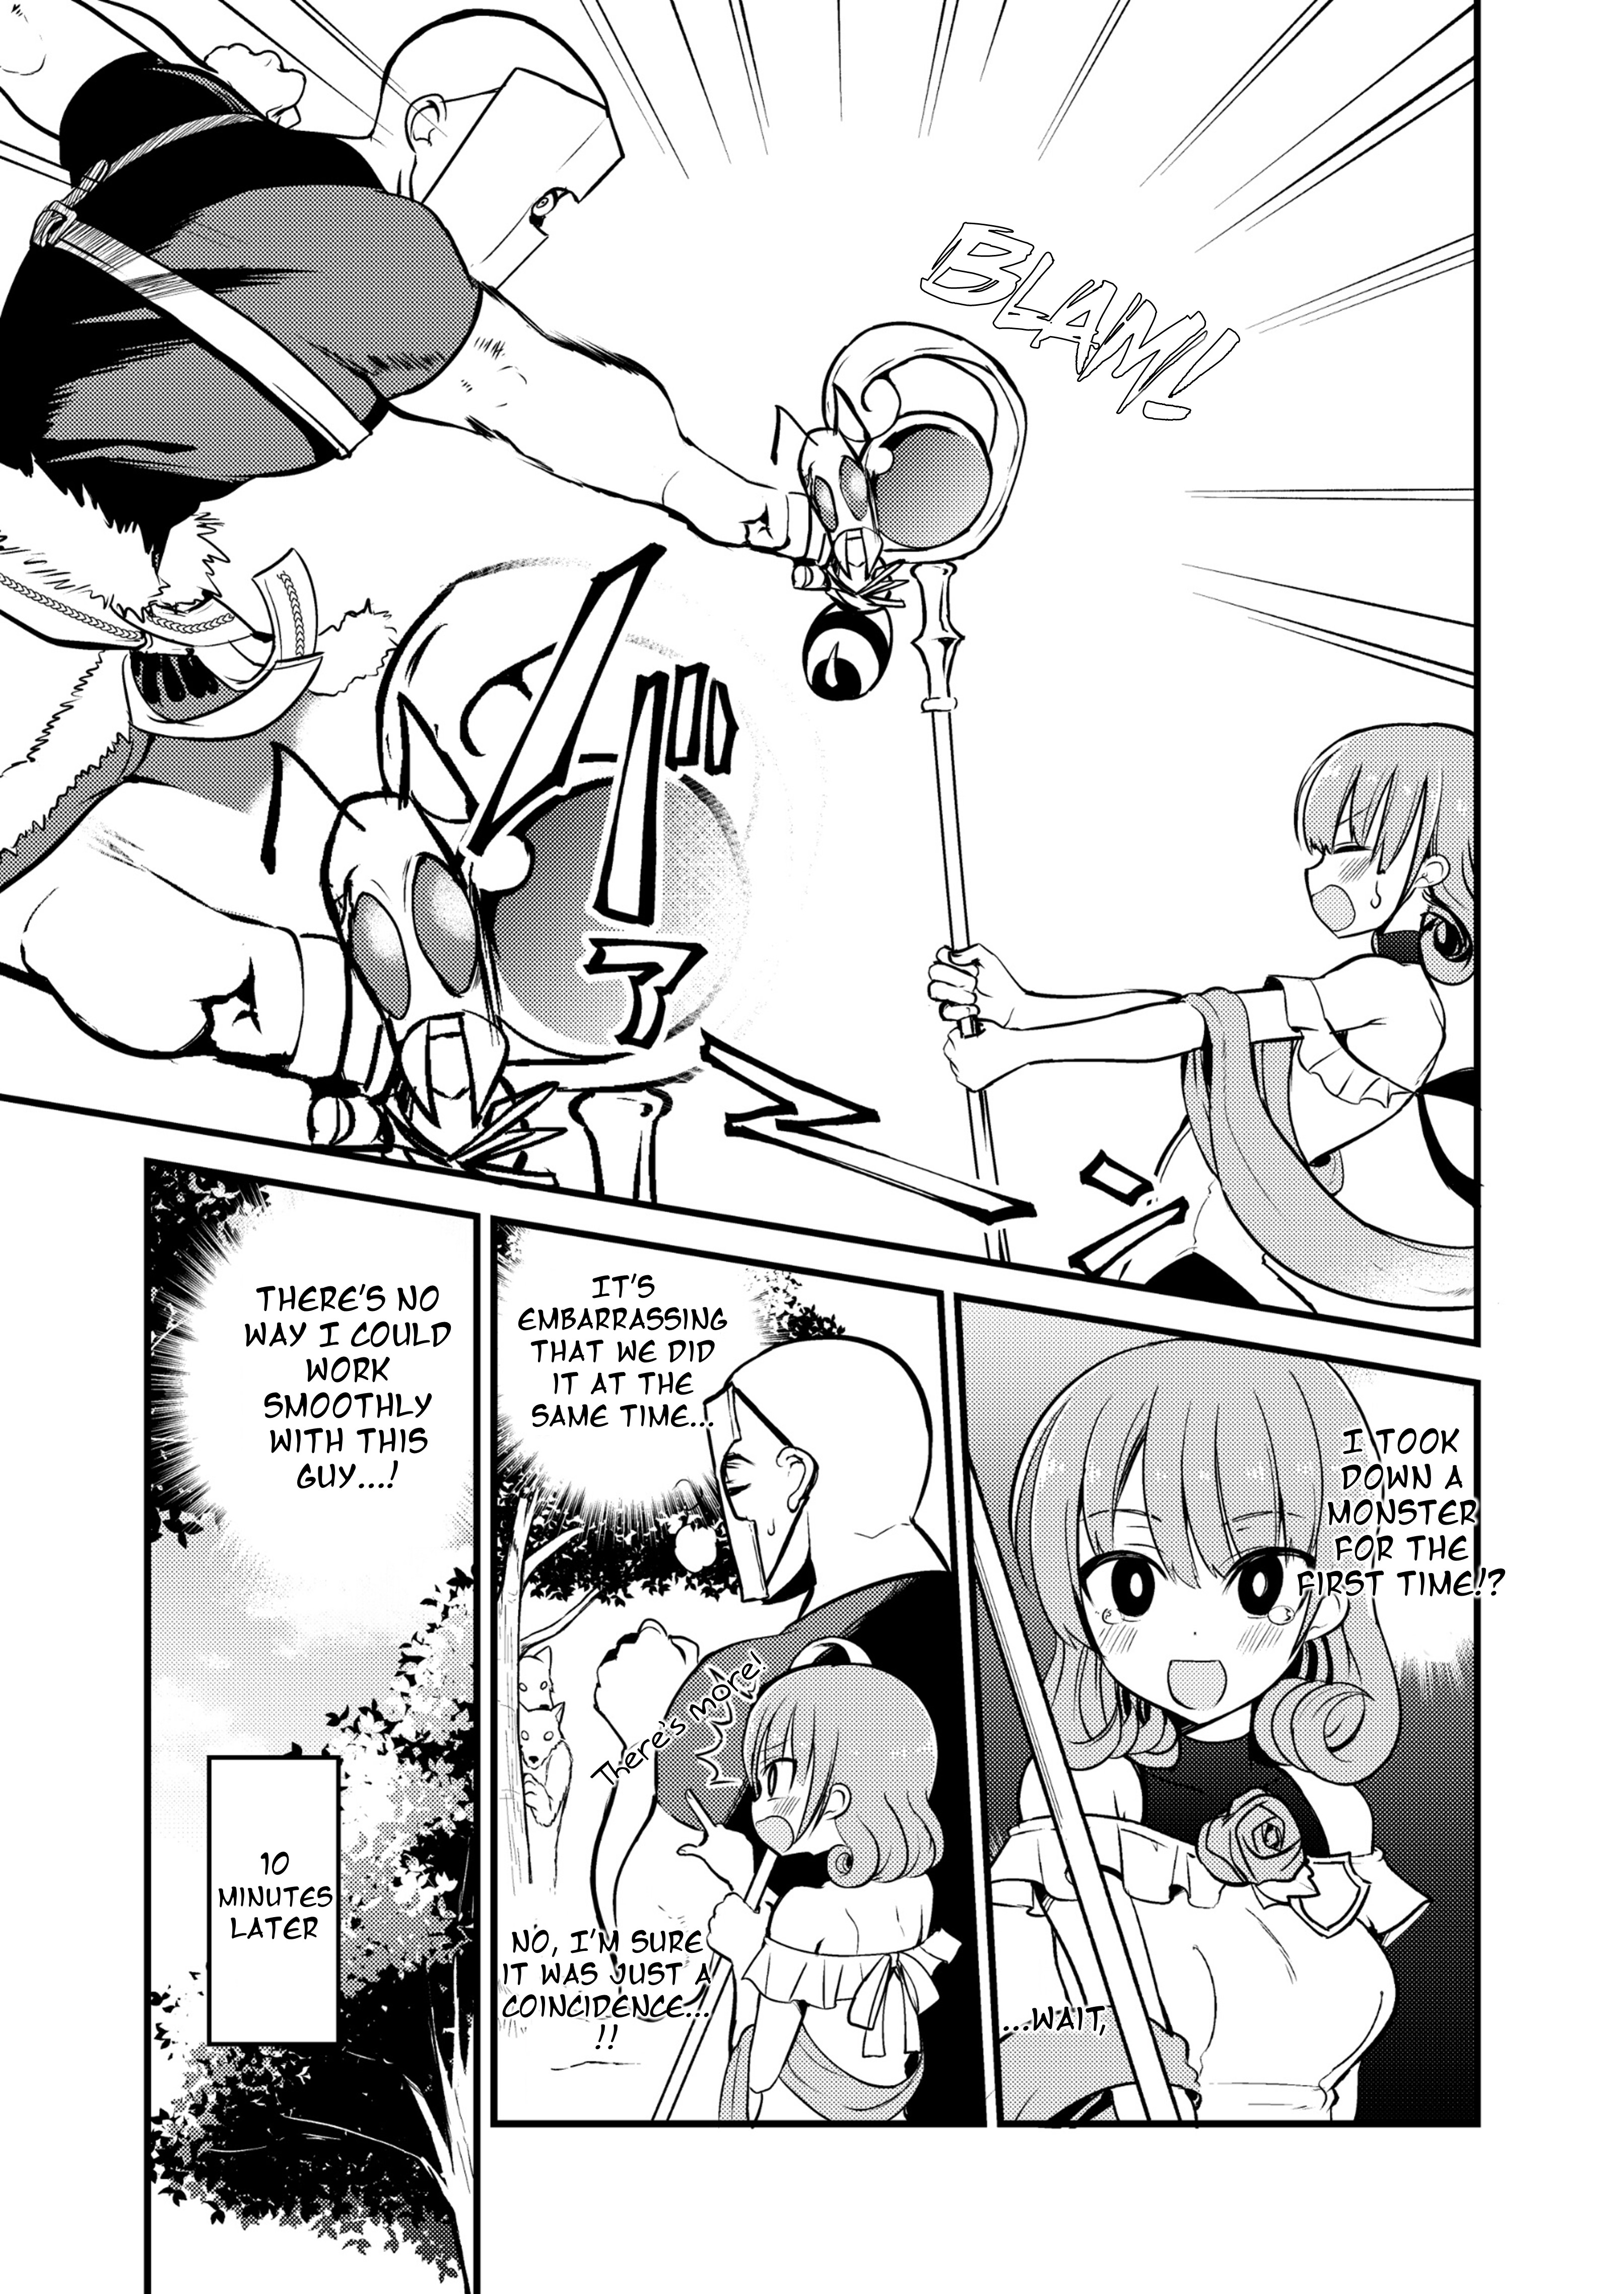 Shiro Madoushi Syrup-San Vol.1 Chapter 23: White Mage Chiffon And A Battle - Picture 3